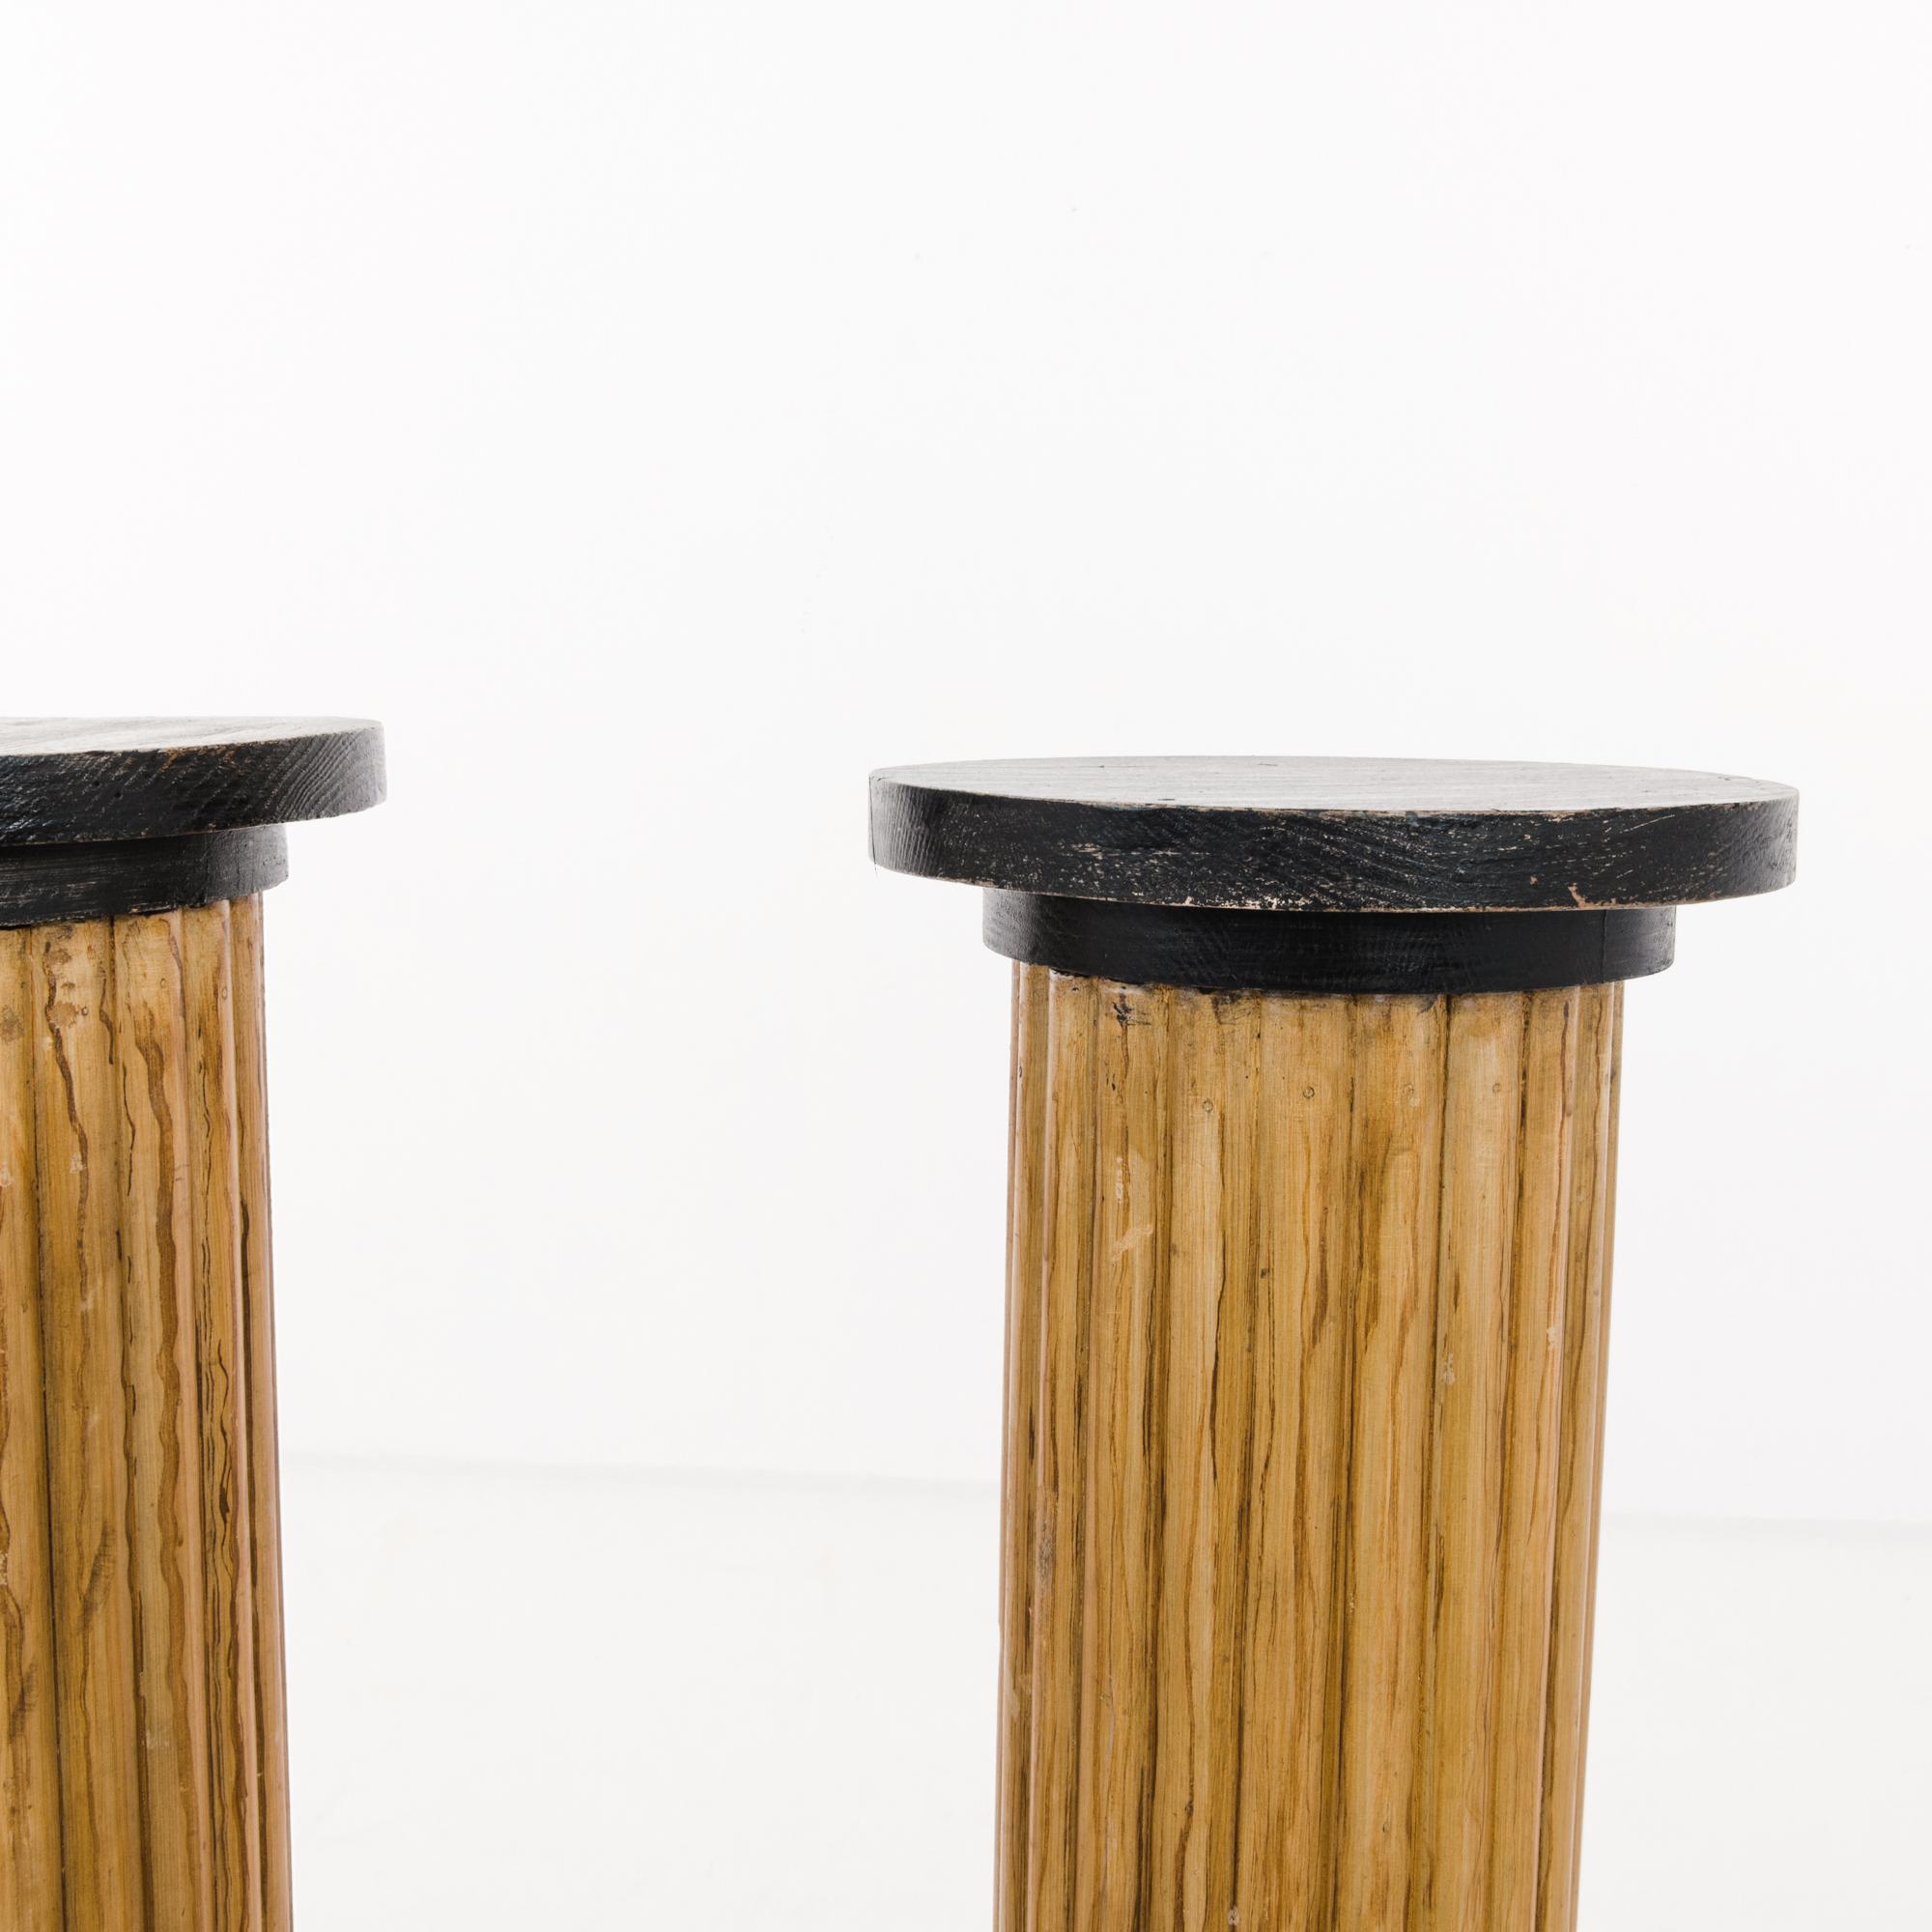 Neoclassical Revival 1920s French Wooden Pedestals, a Pair